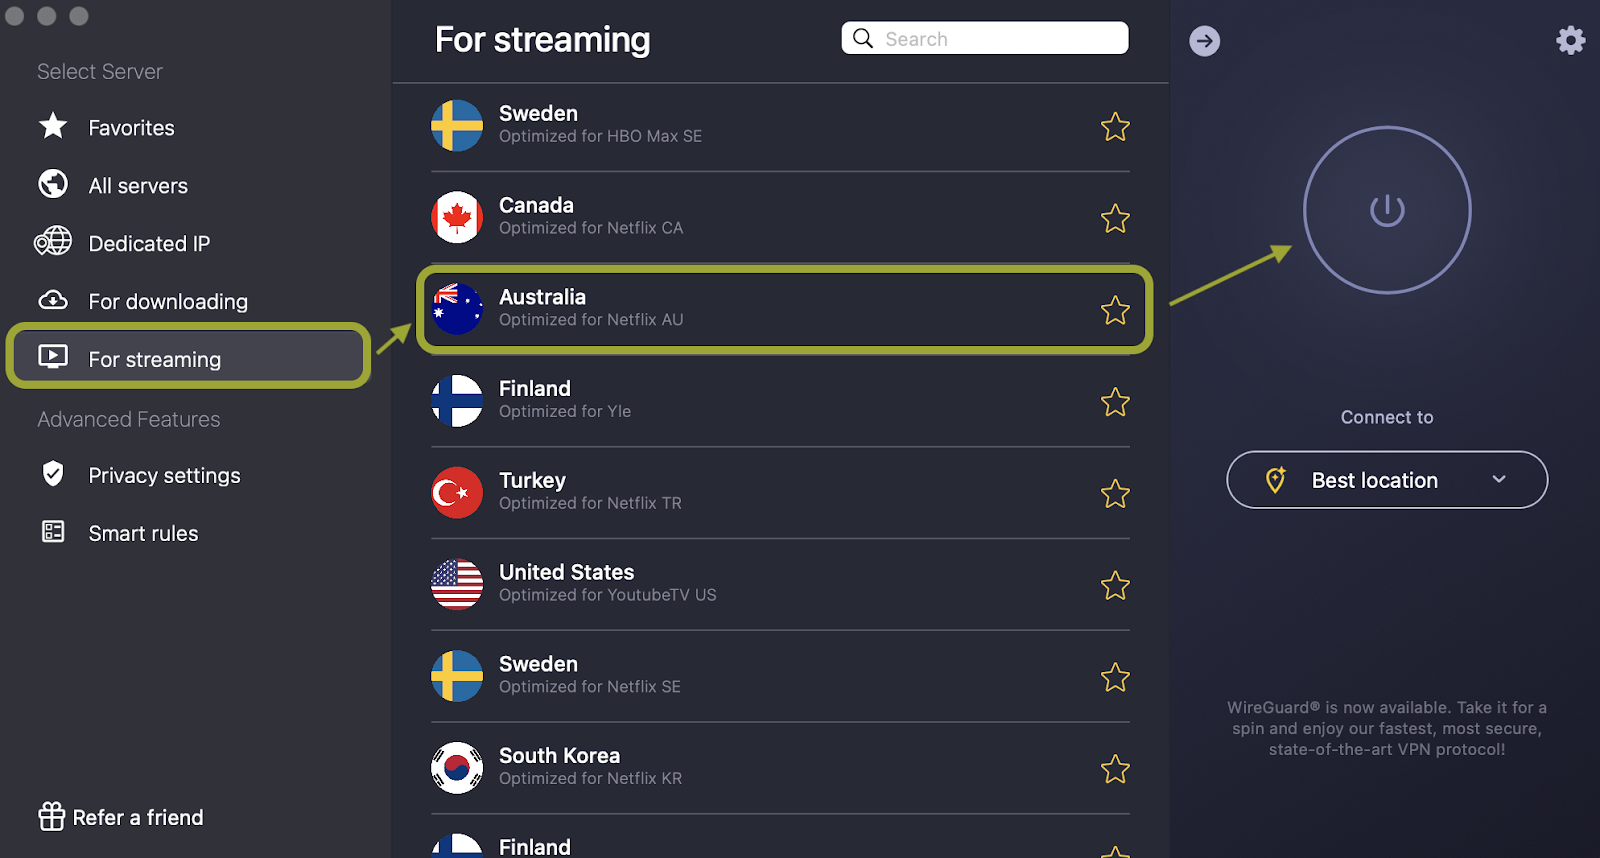 Screenshot of CyberGhost VPN interface showing the list of streaming-optimized servers with Australia highlighted